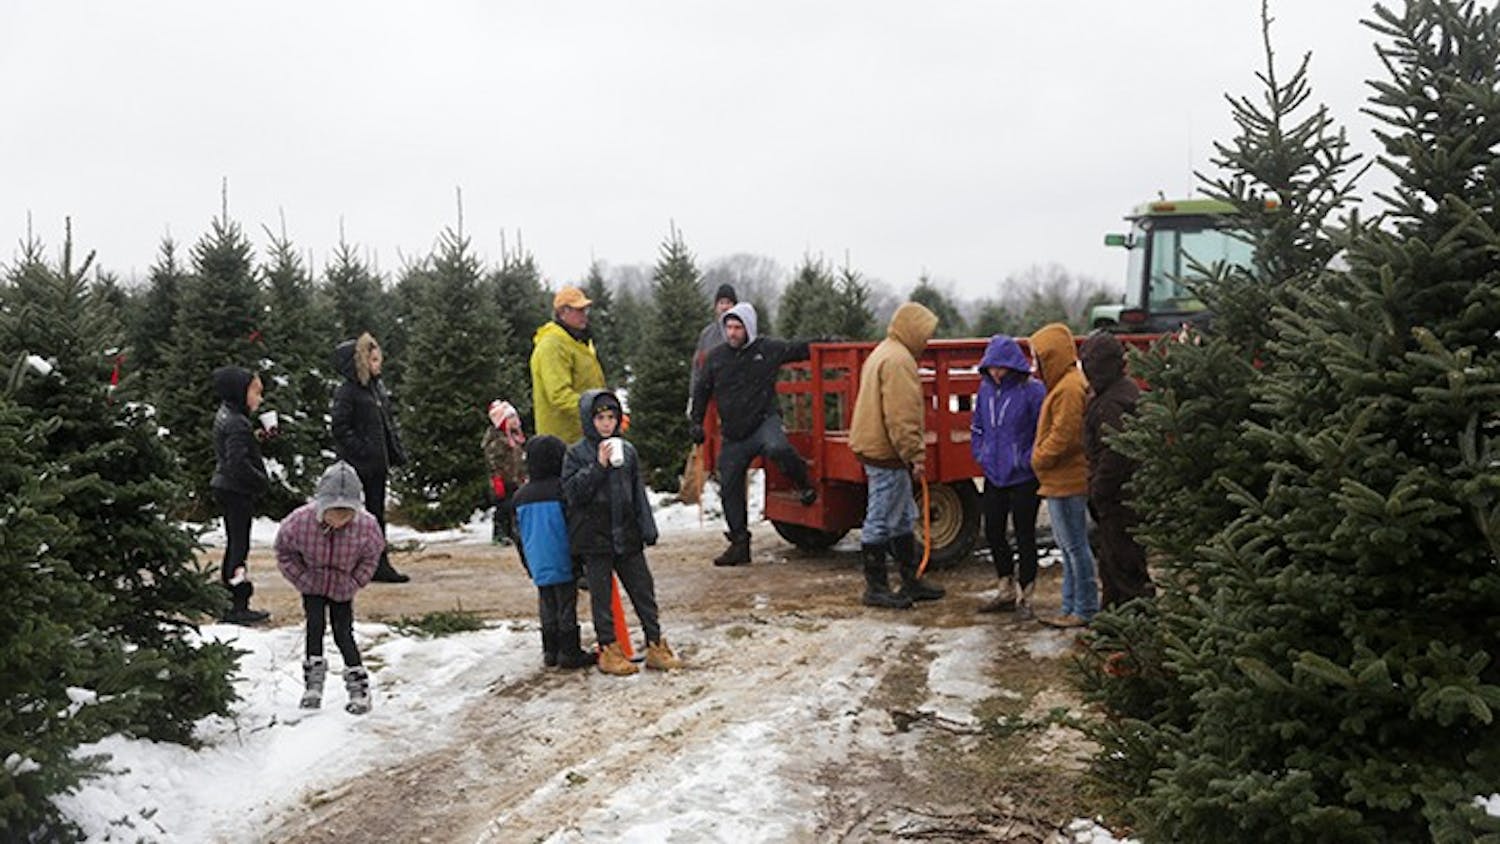 A popular family tradition is cutting down a Christmas tree for the holidays.